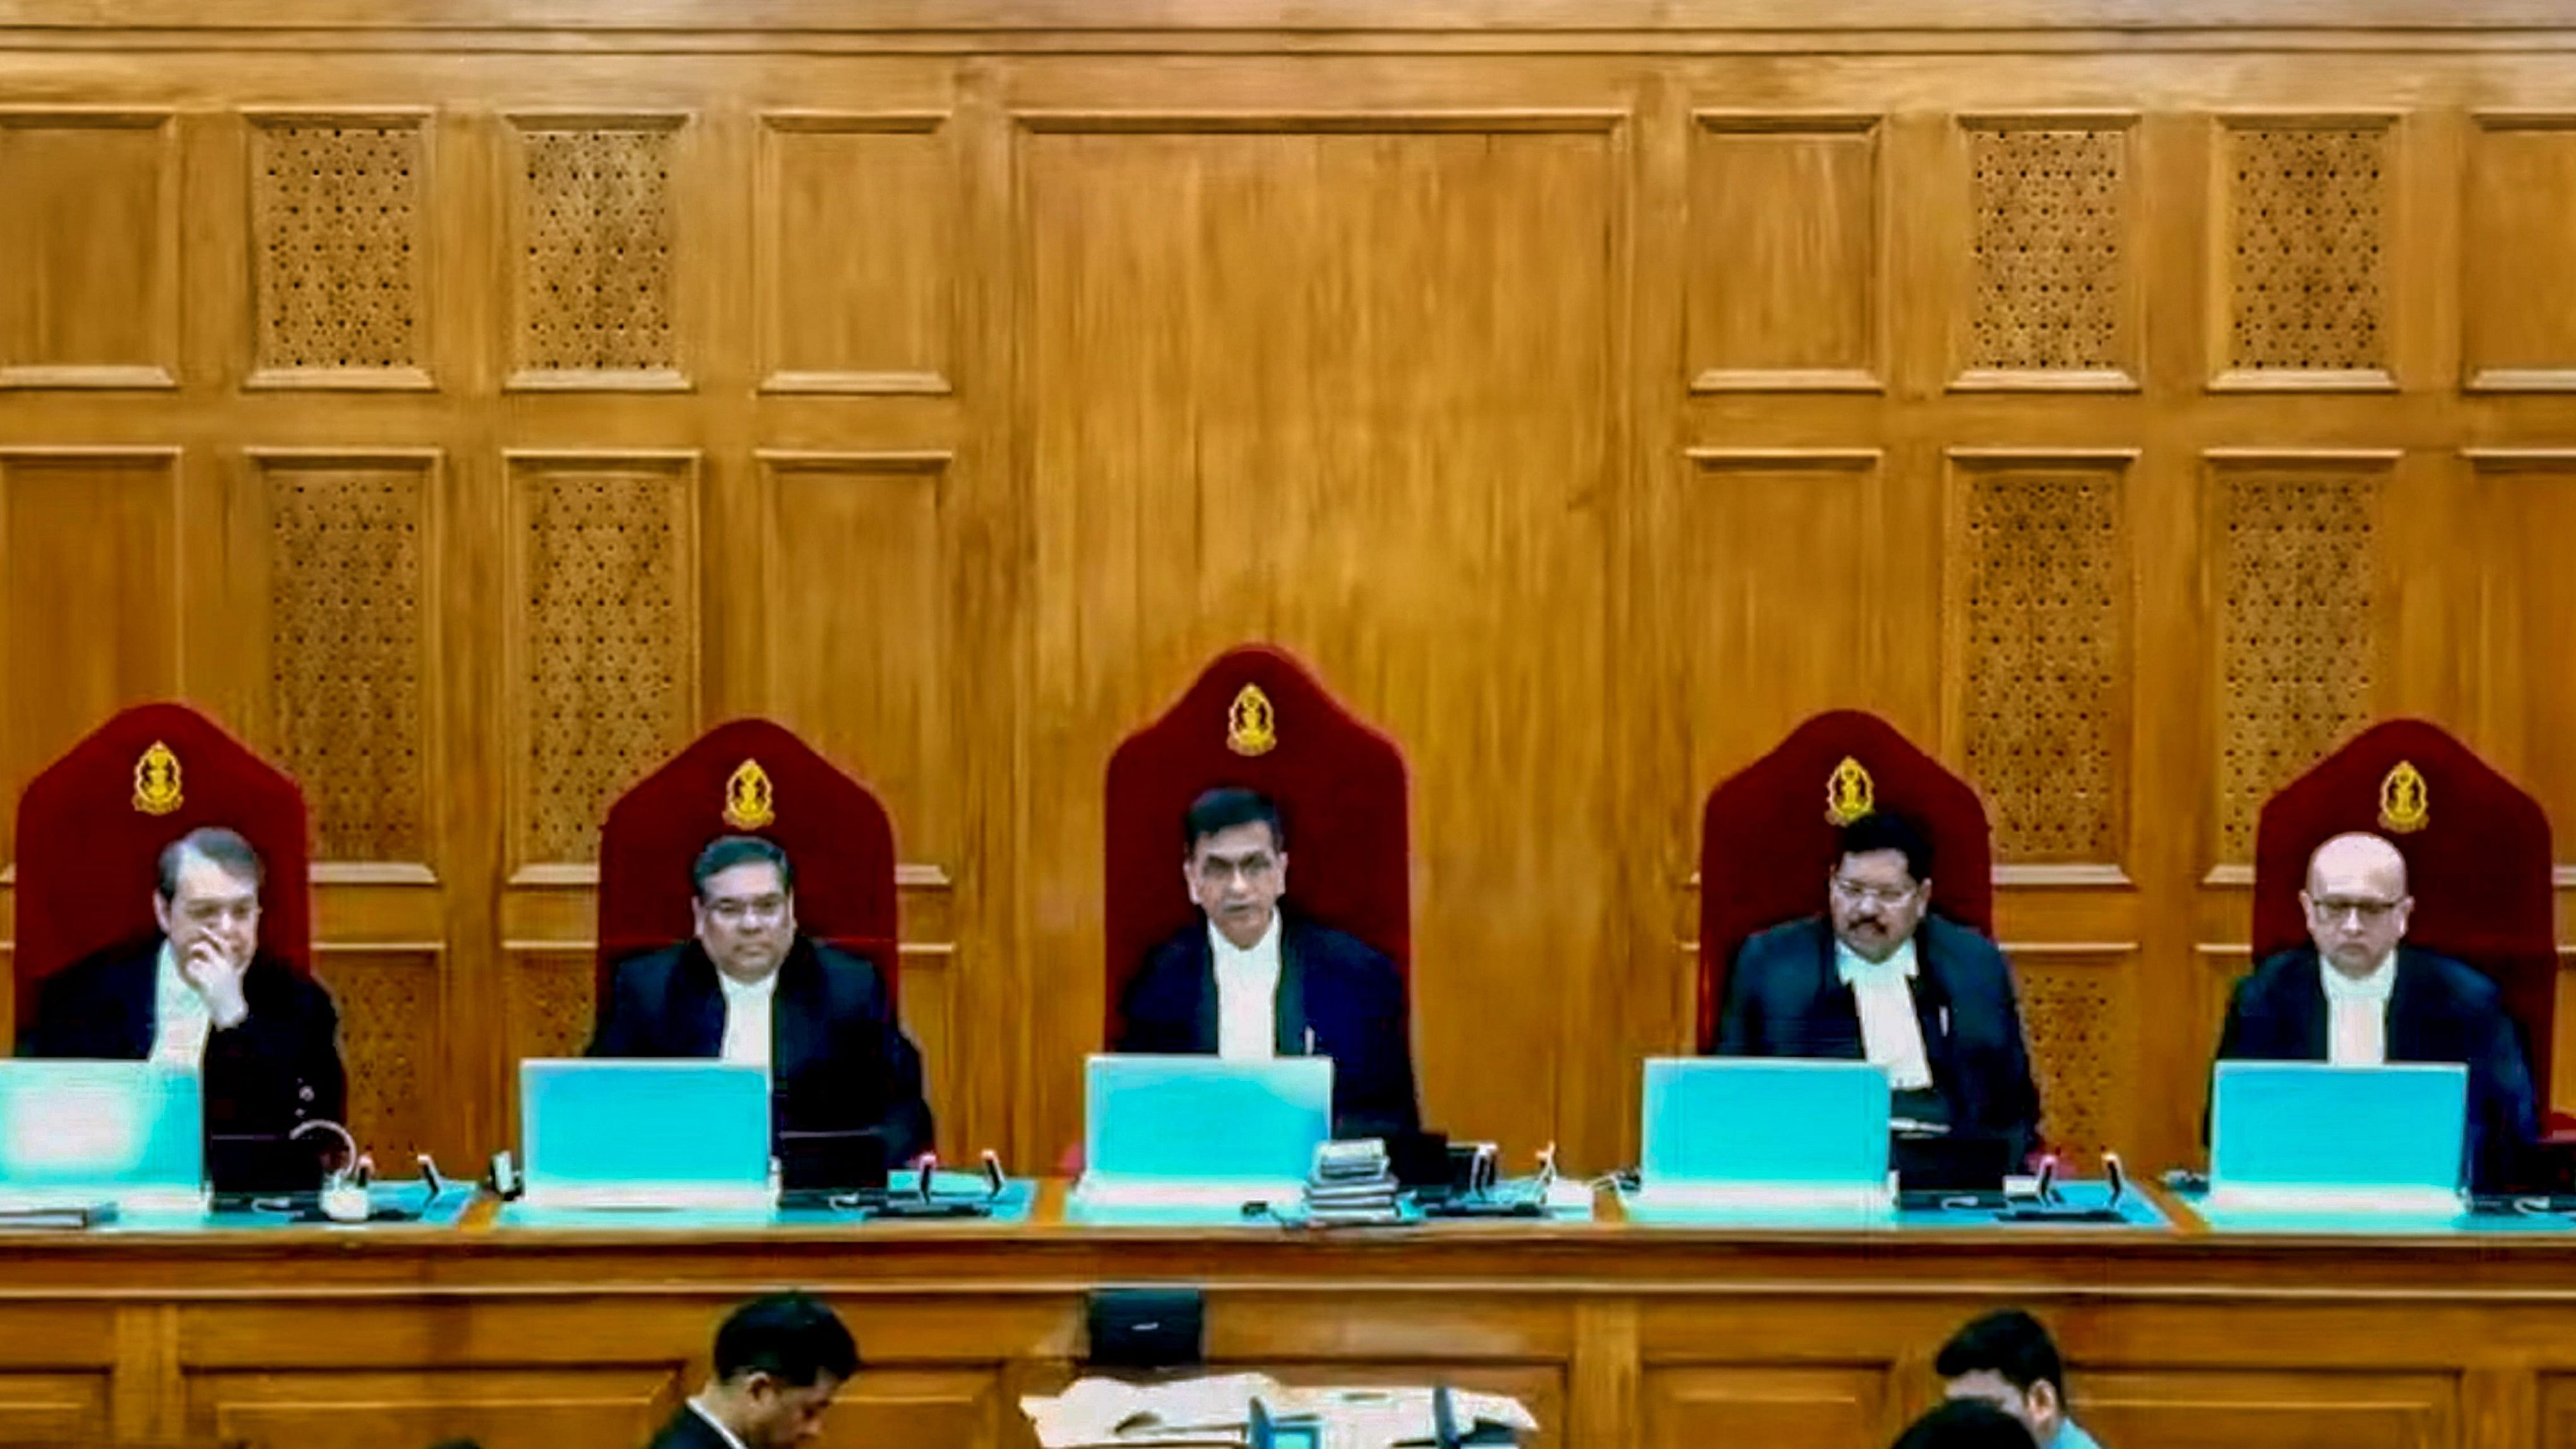 <div class="paragraphs"><p>The five-judge bench headed by Chief Justice of India Dr D.Y. Chandrachud and comprising Justices Sanjiv Khanna, B.R. Gavai, J.B. Pardiwala and Manoj Mishra during pronouncement of verdict on electoral bond scheme on Thursday.</p></div>